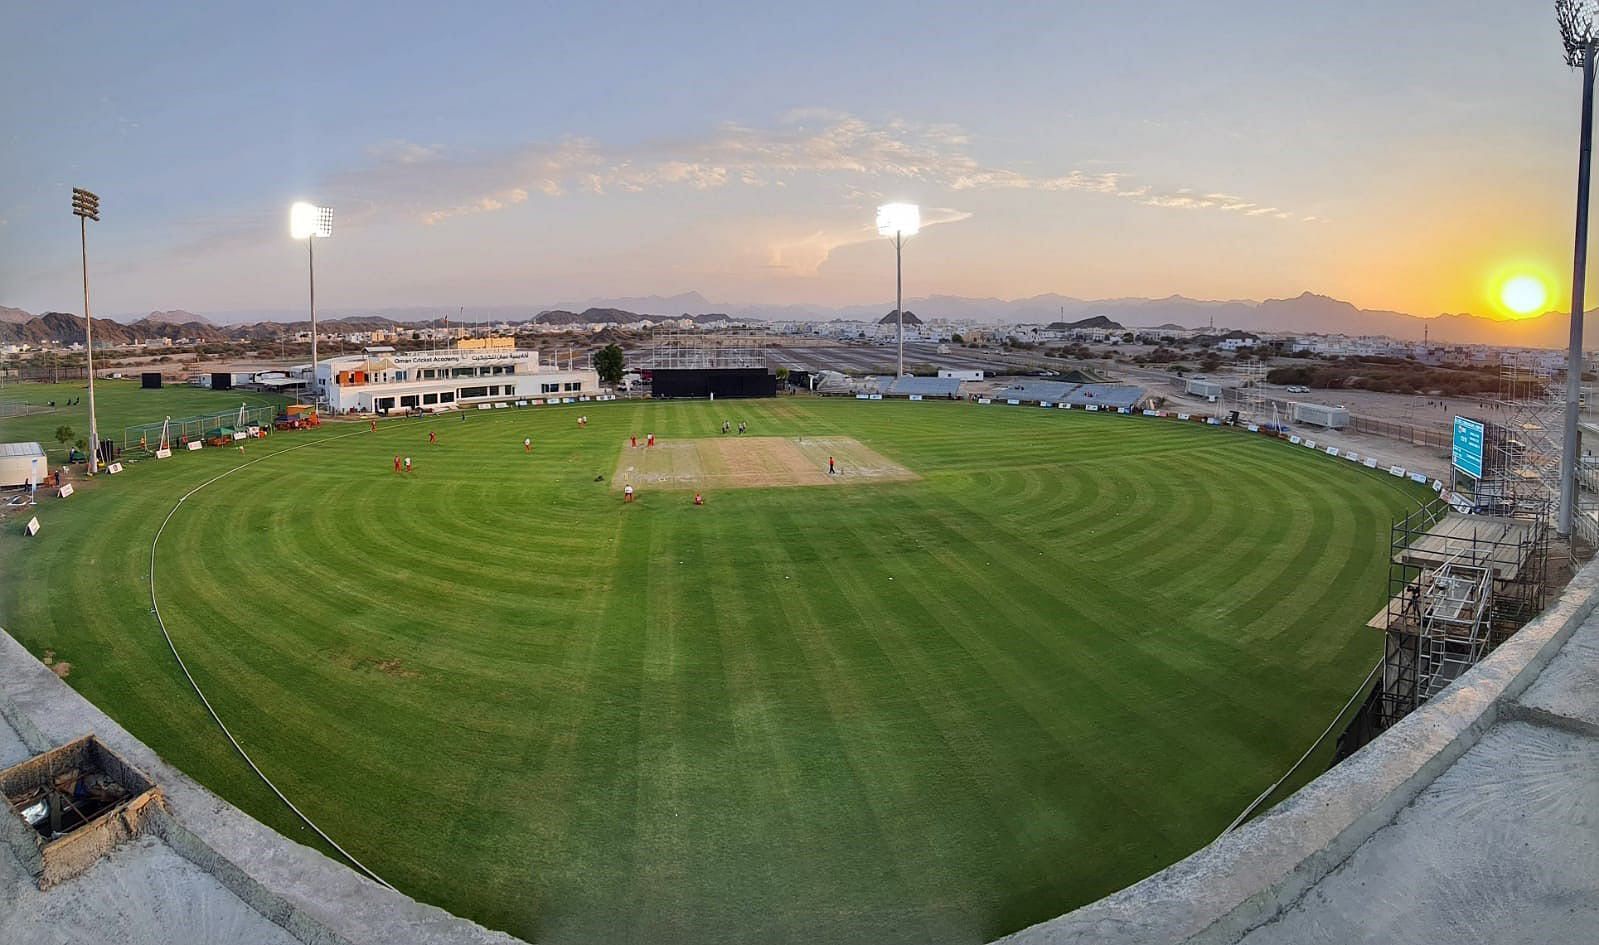 All of the qualifier matches will take place at the Oman Cricket Academy Ground.